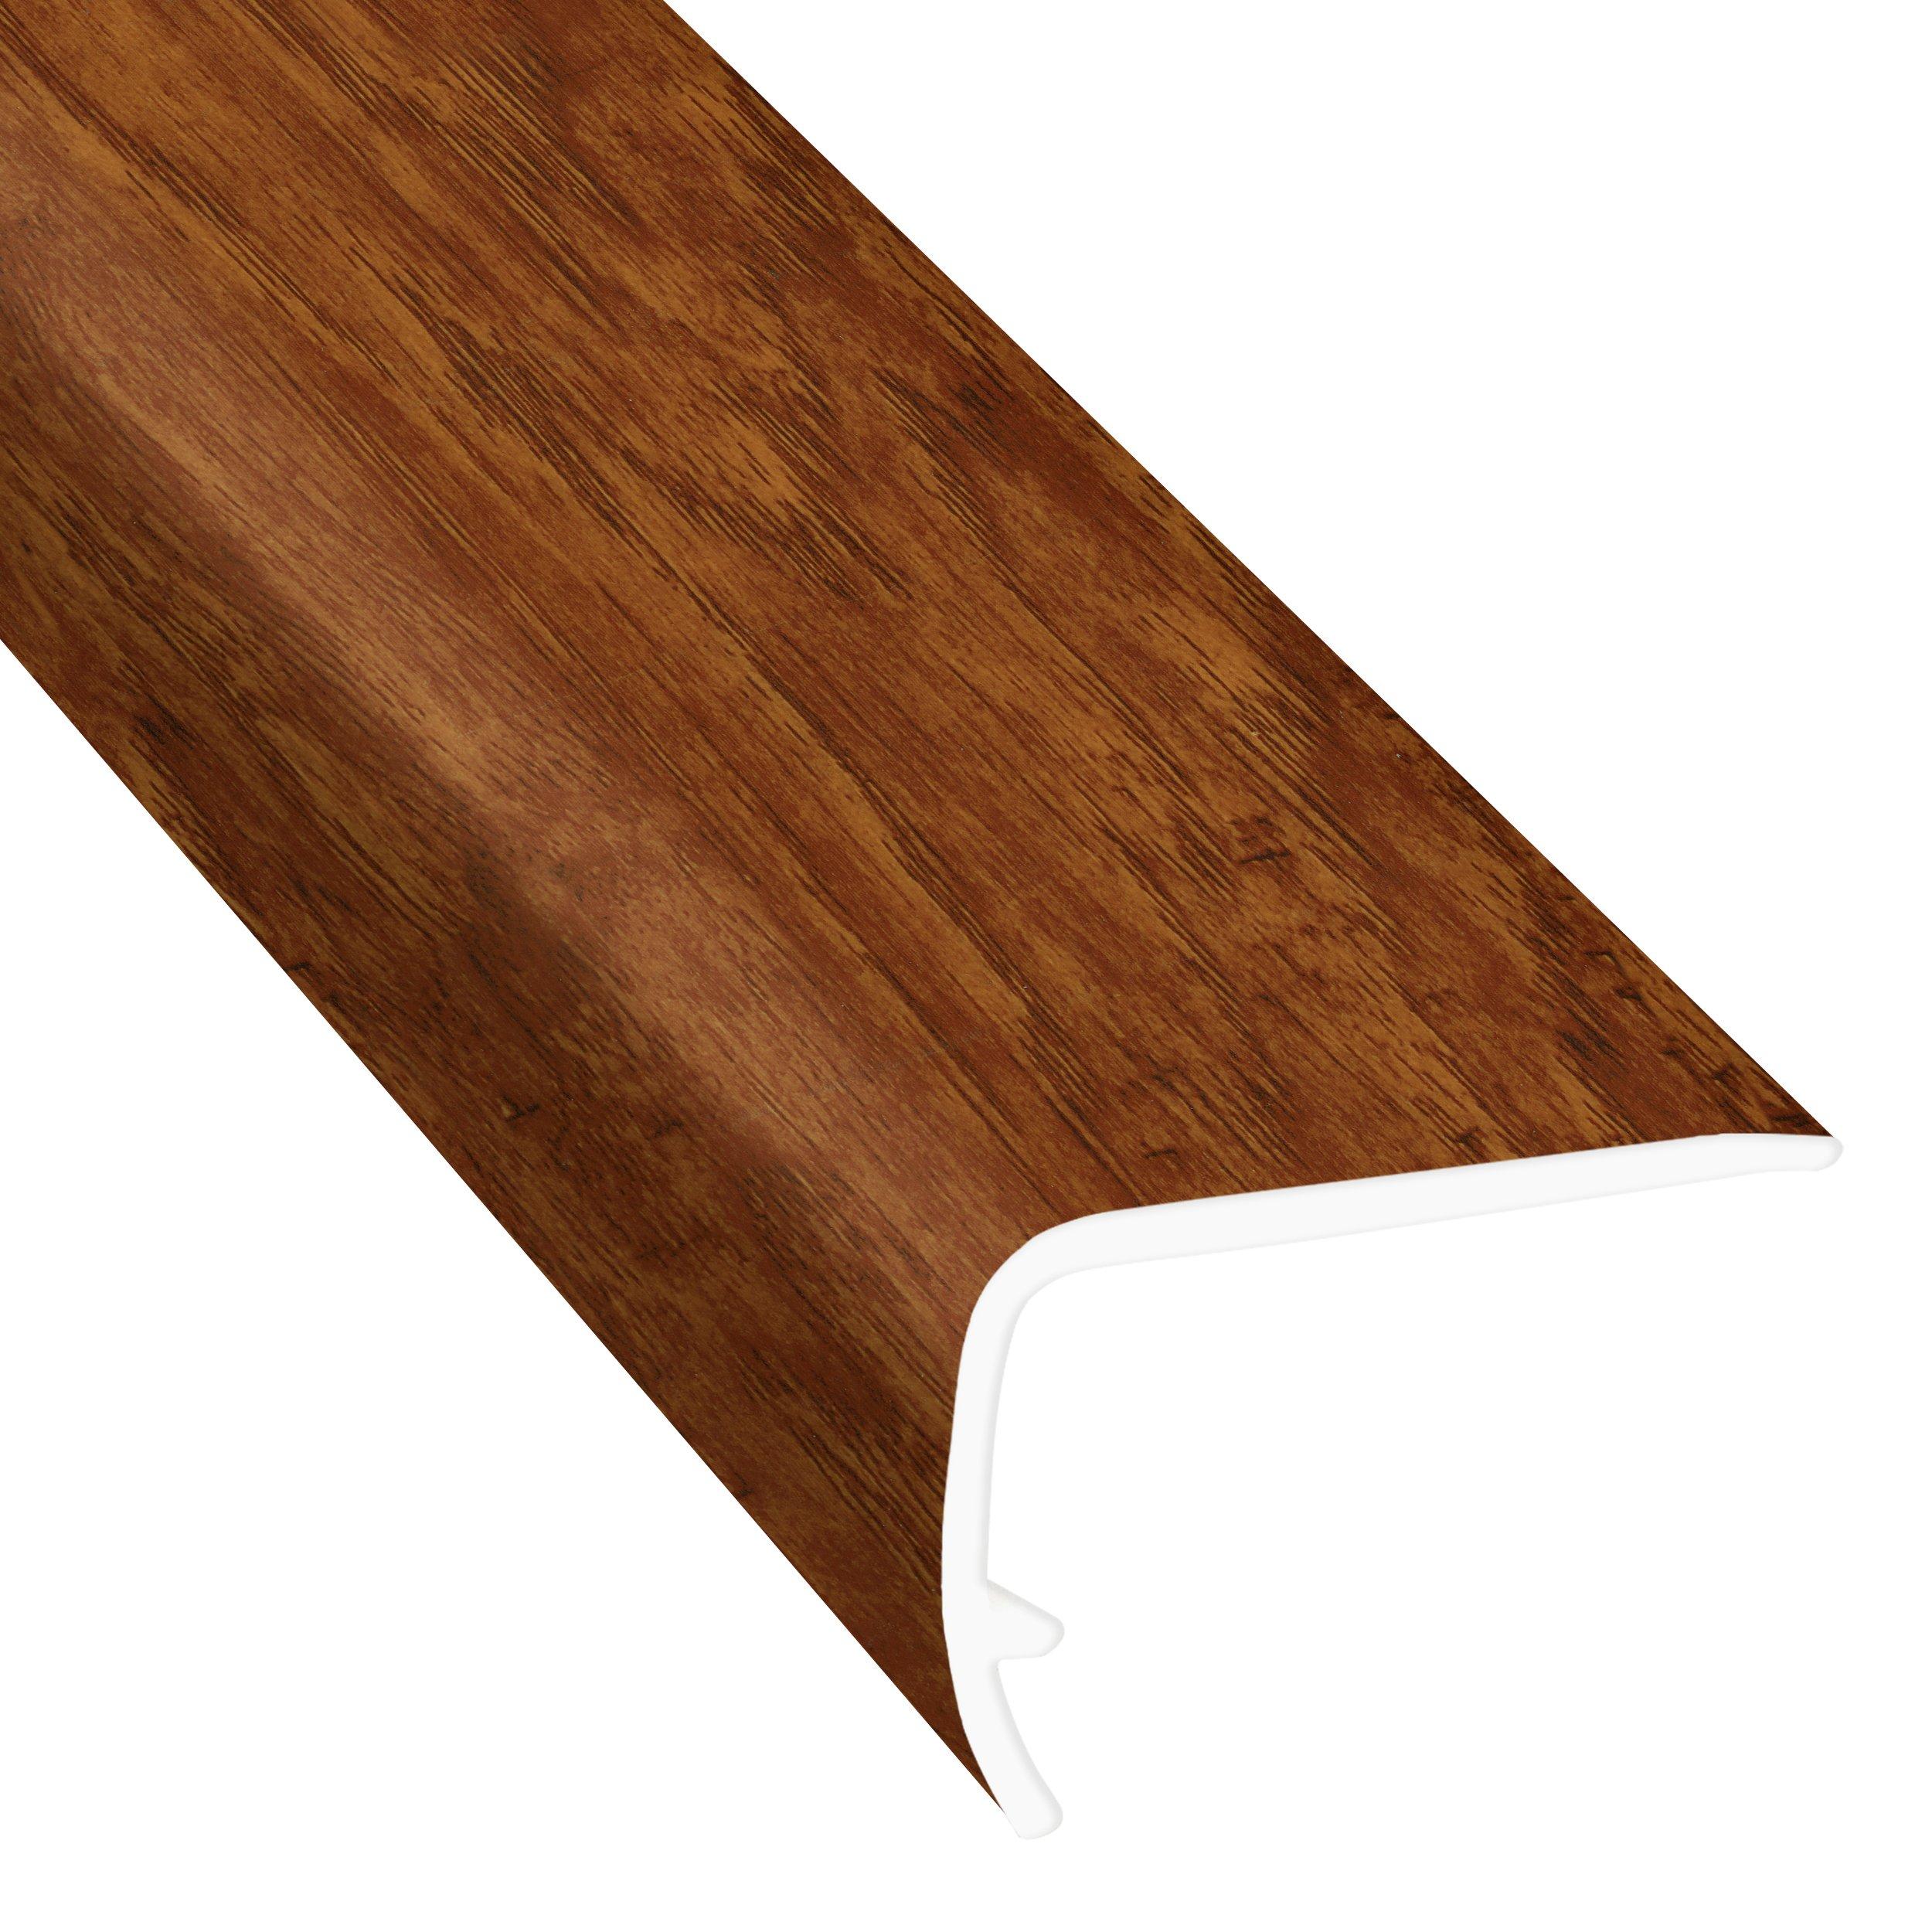 Grande Hickory 94in. Vinyl Overlapping Stair Nose